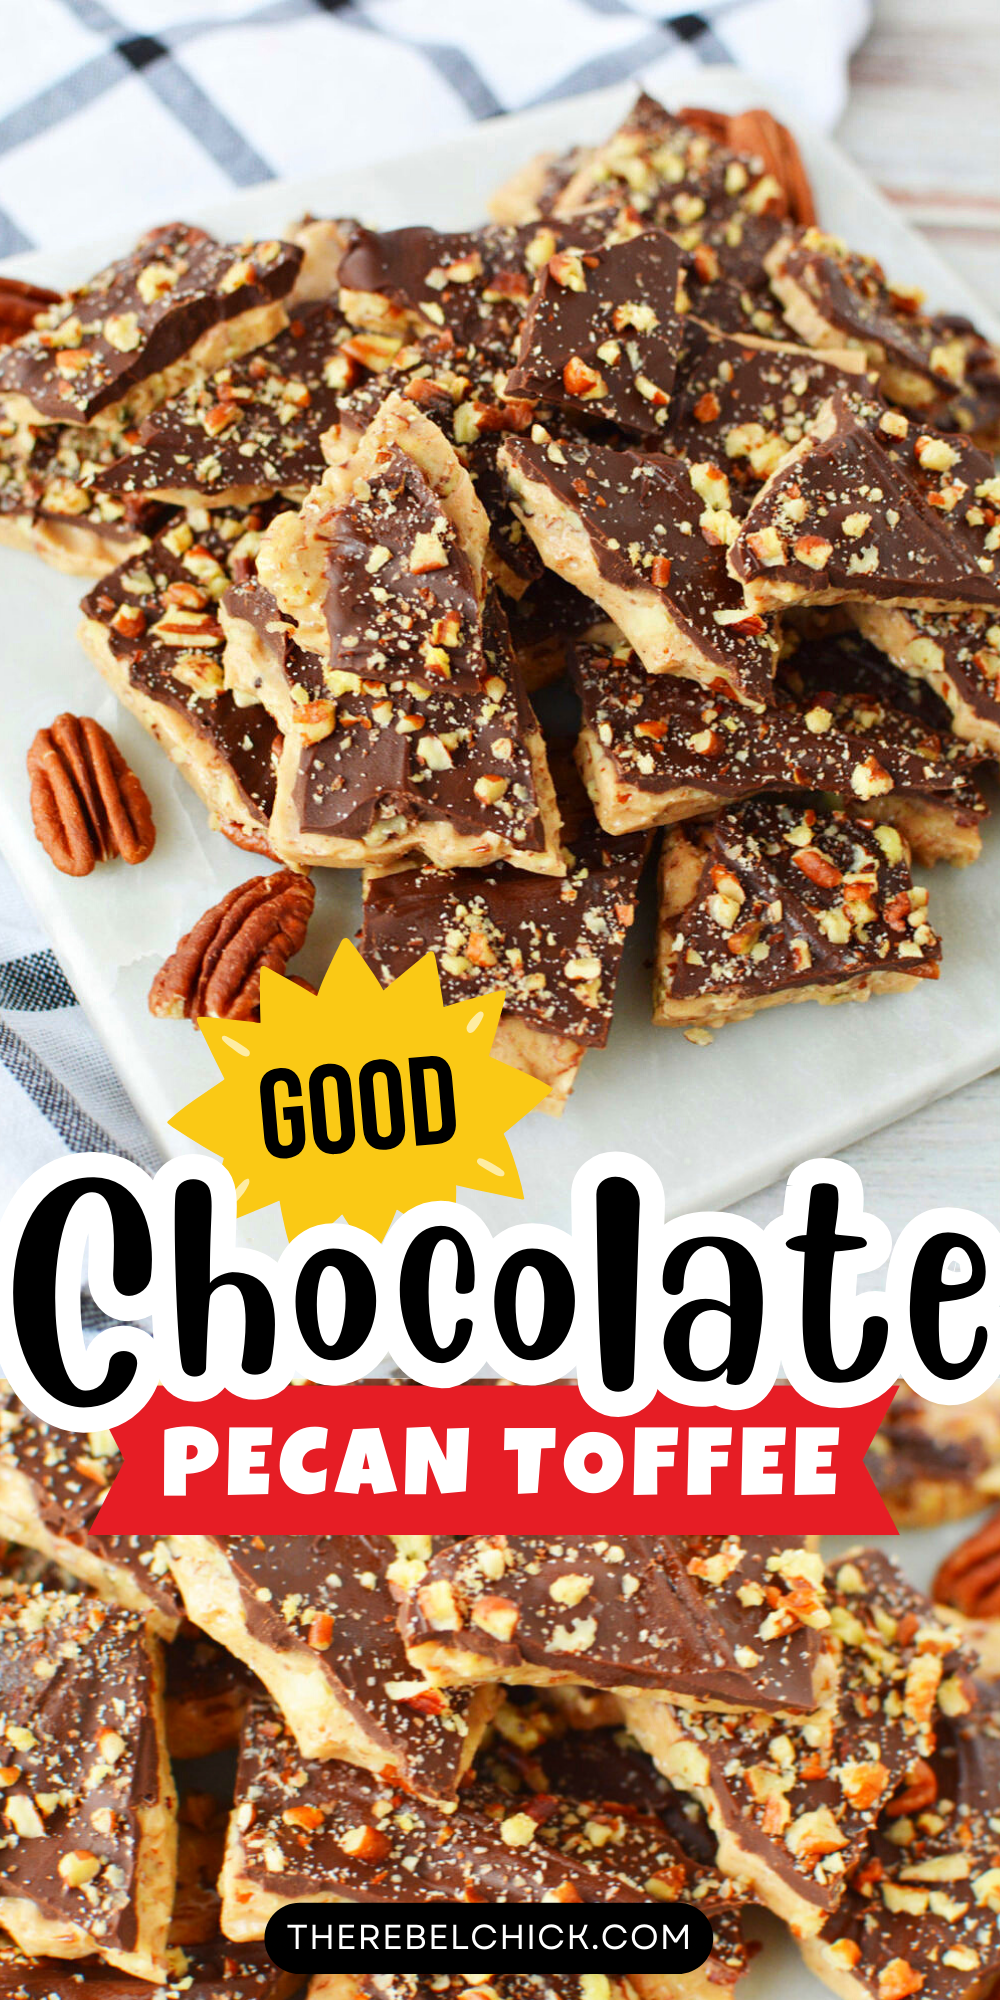 Chocolate Pecan Toffee on a platter